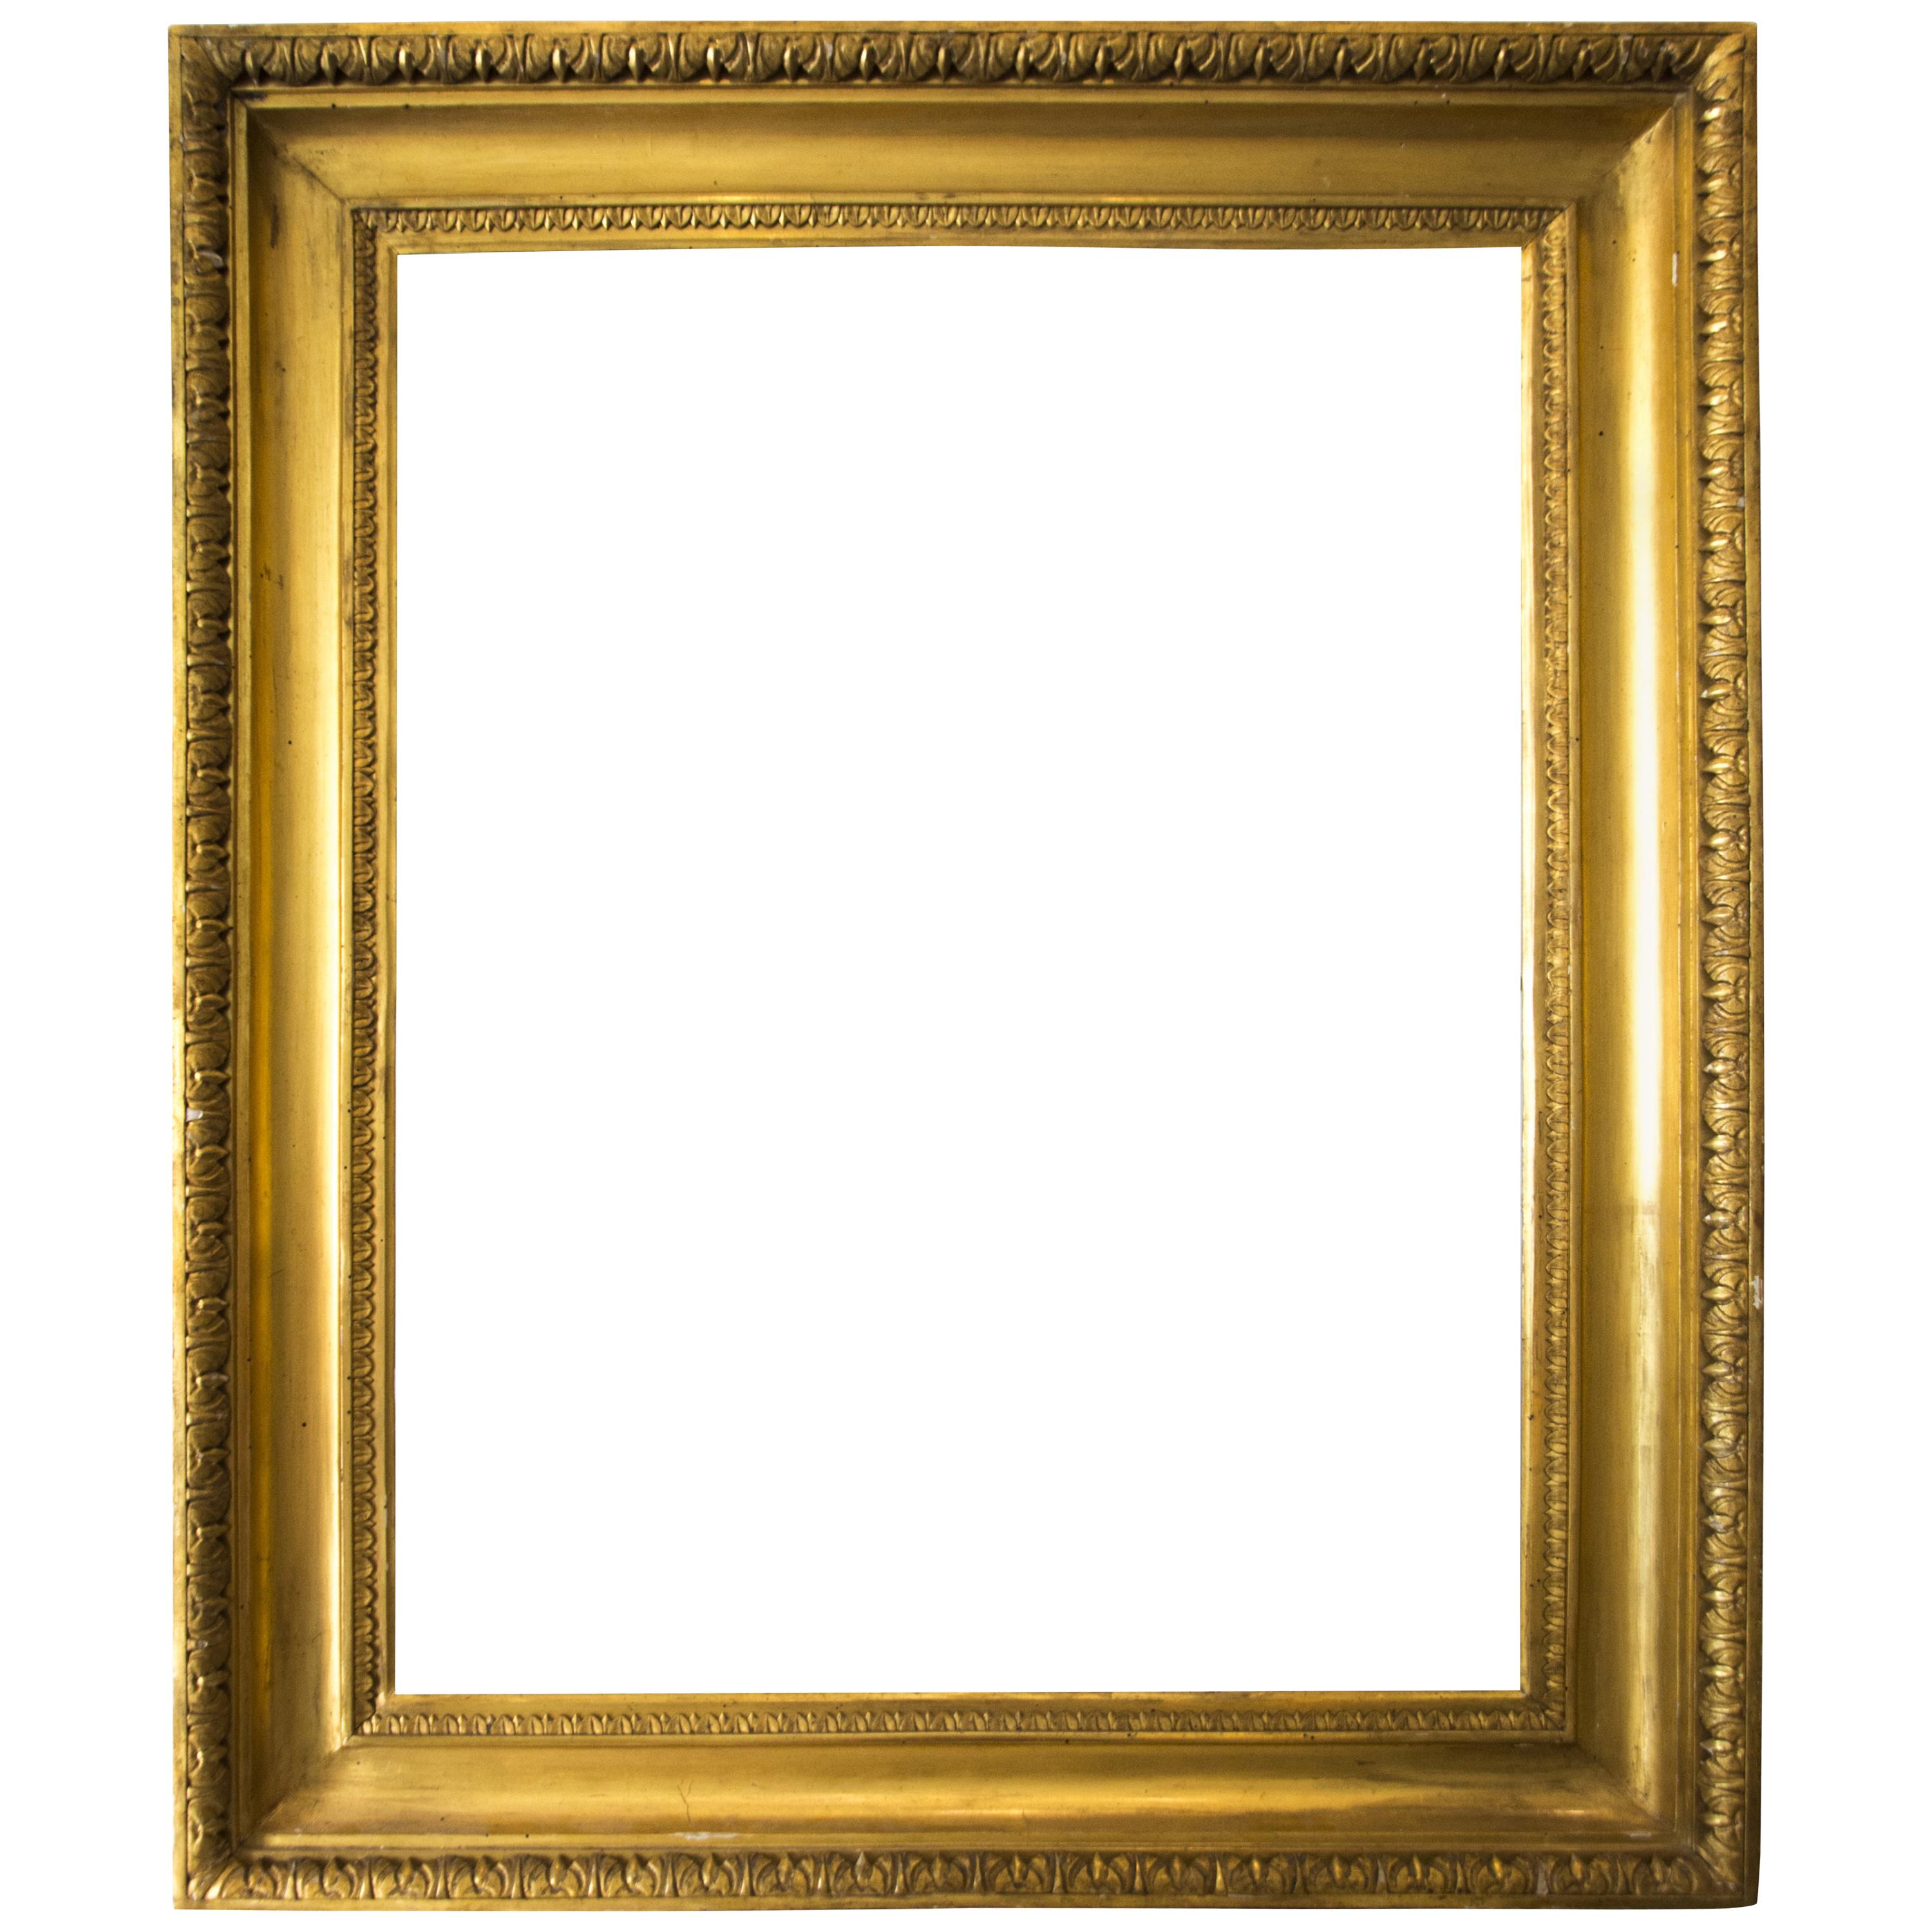 Naples Frame, End of 18th Century